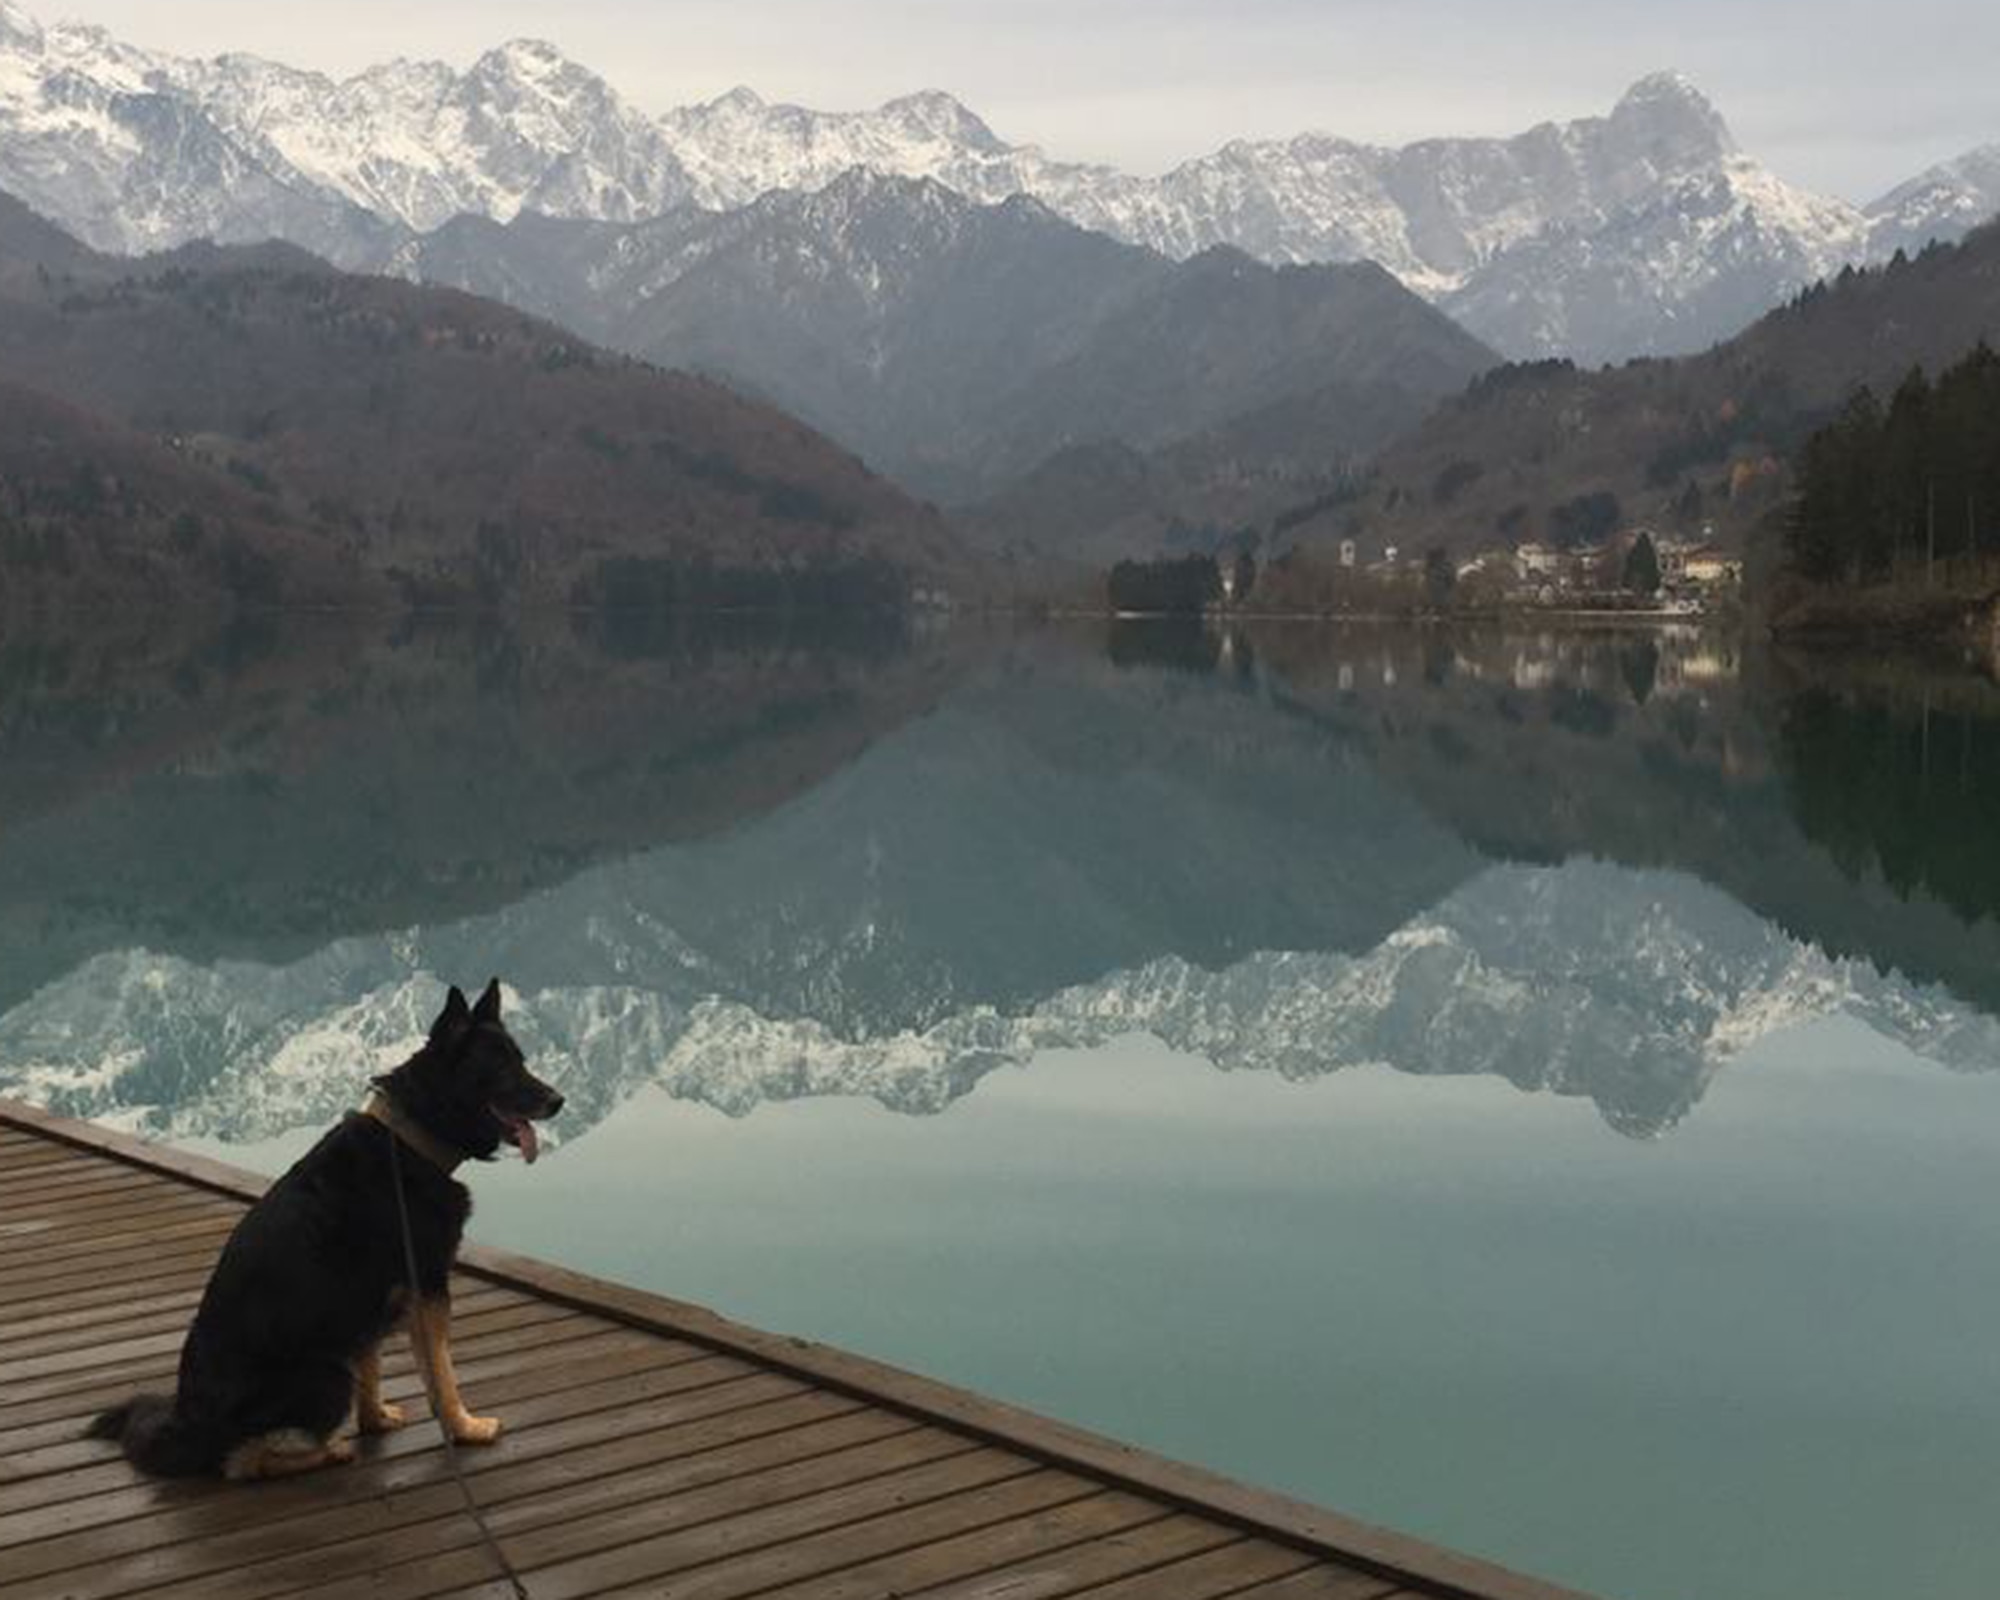 Military Working Dog Luc, 100th Security Forces Squadron, takes time out after working a mission in Croatia to enjoy the view of mountains near Aviano Air Base, Italy, in November 2015. His then-handler, Tech. Sgt. Roy Carter, 100th SFS MWD kennelmaster, explained that since the team drove to Aviano from Croatia, he wanted to let Luc have time to enjoy just being a dog for the day, and they spent time walking around the mountains, just being free and having no commands for the short time they were there. (Courtesy photo by Tech. Sgt. Roy Carter)